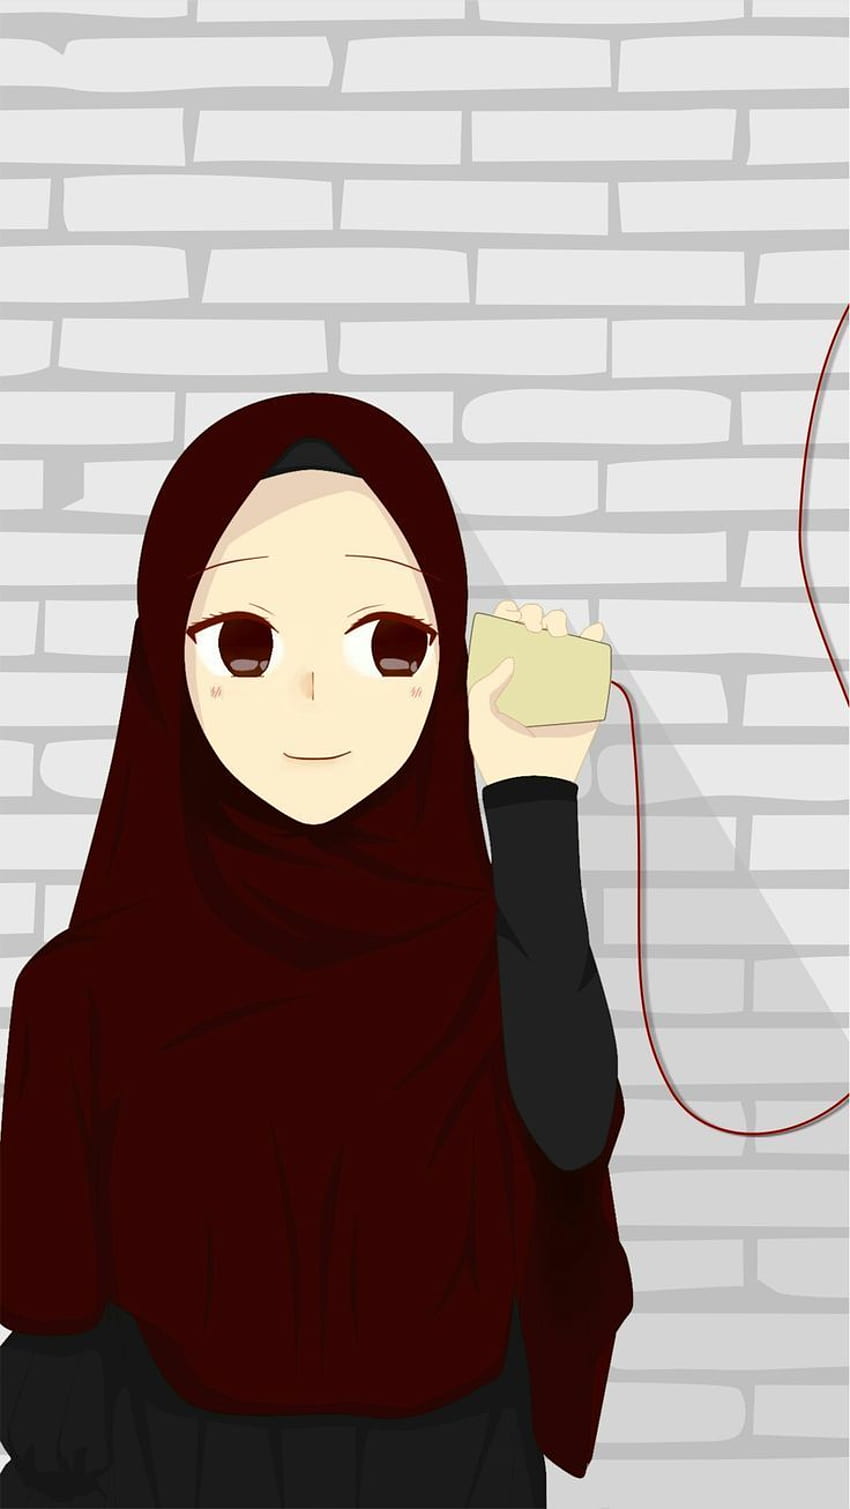 Islamic Art and Quotes — Animation of Smiling Anime Muslimah From the...